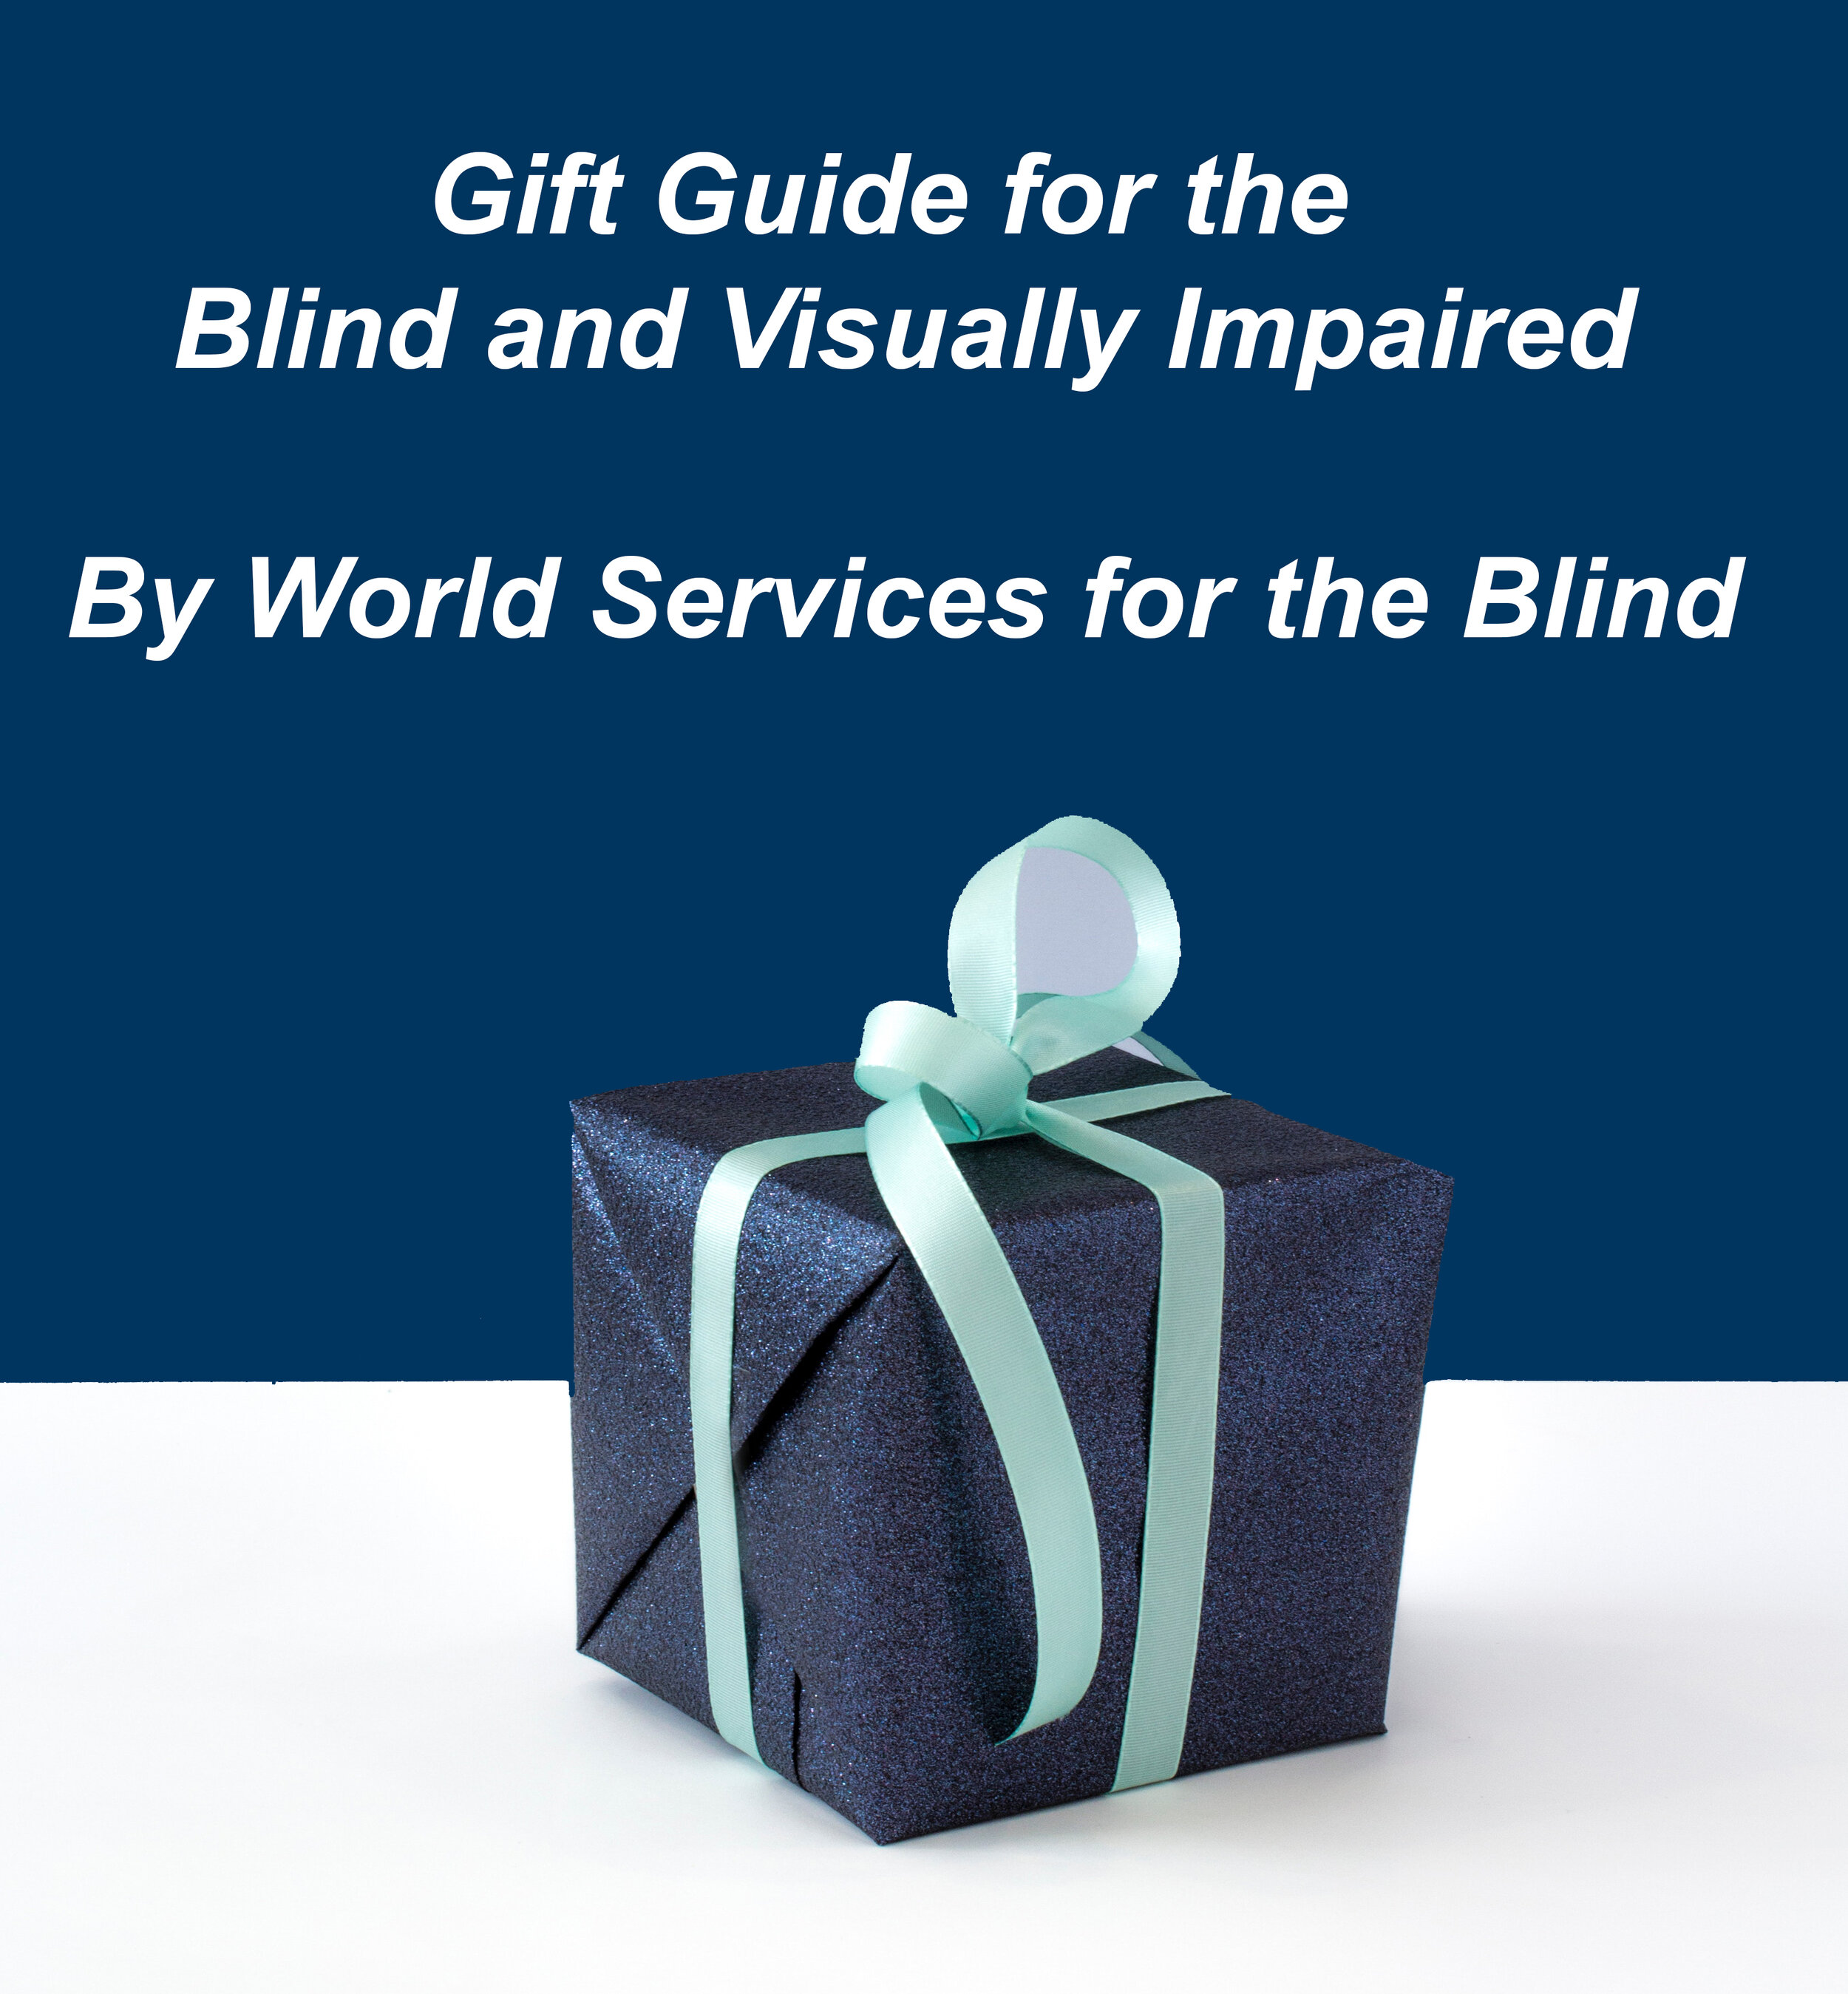 Last Minute Gift Ideas For The Blind and Visually Impaired, Blog